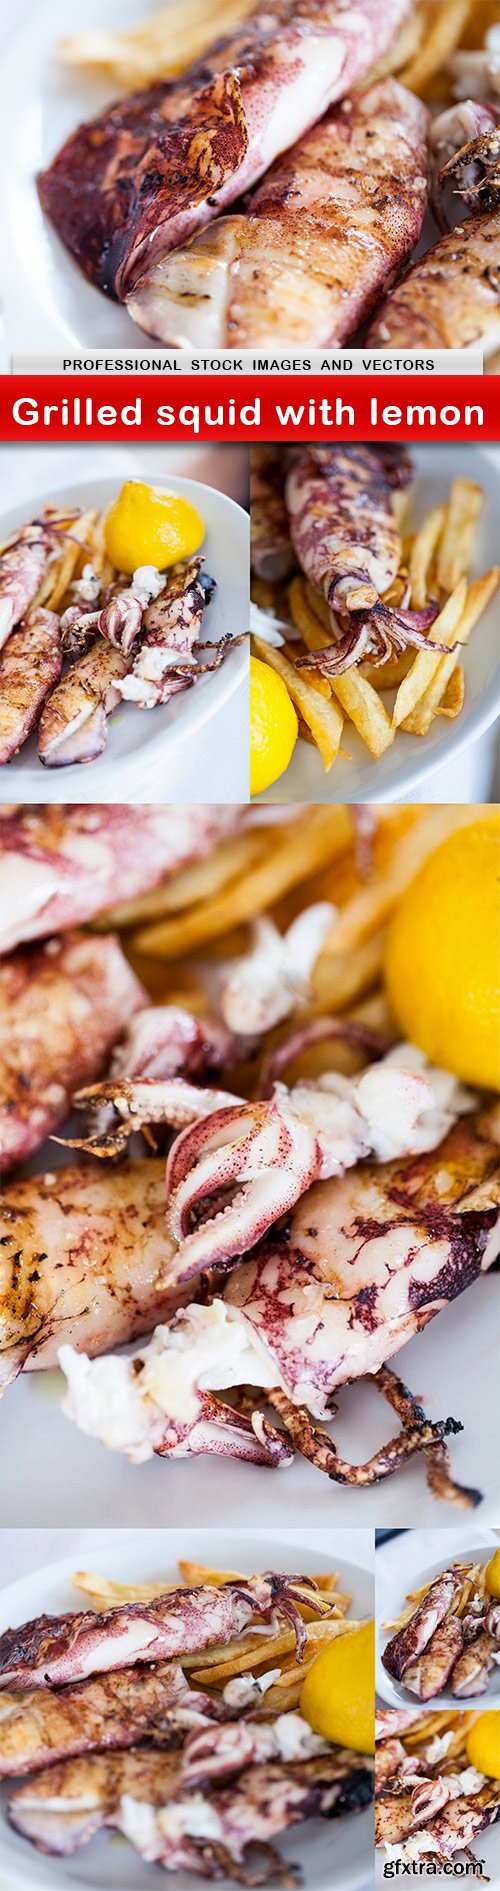 Grilled squid with lemon - 7 UHQ JPEG